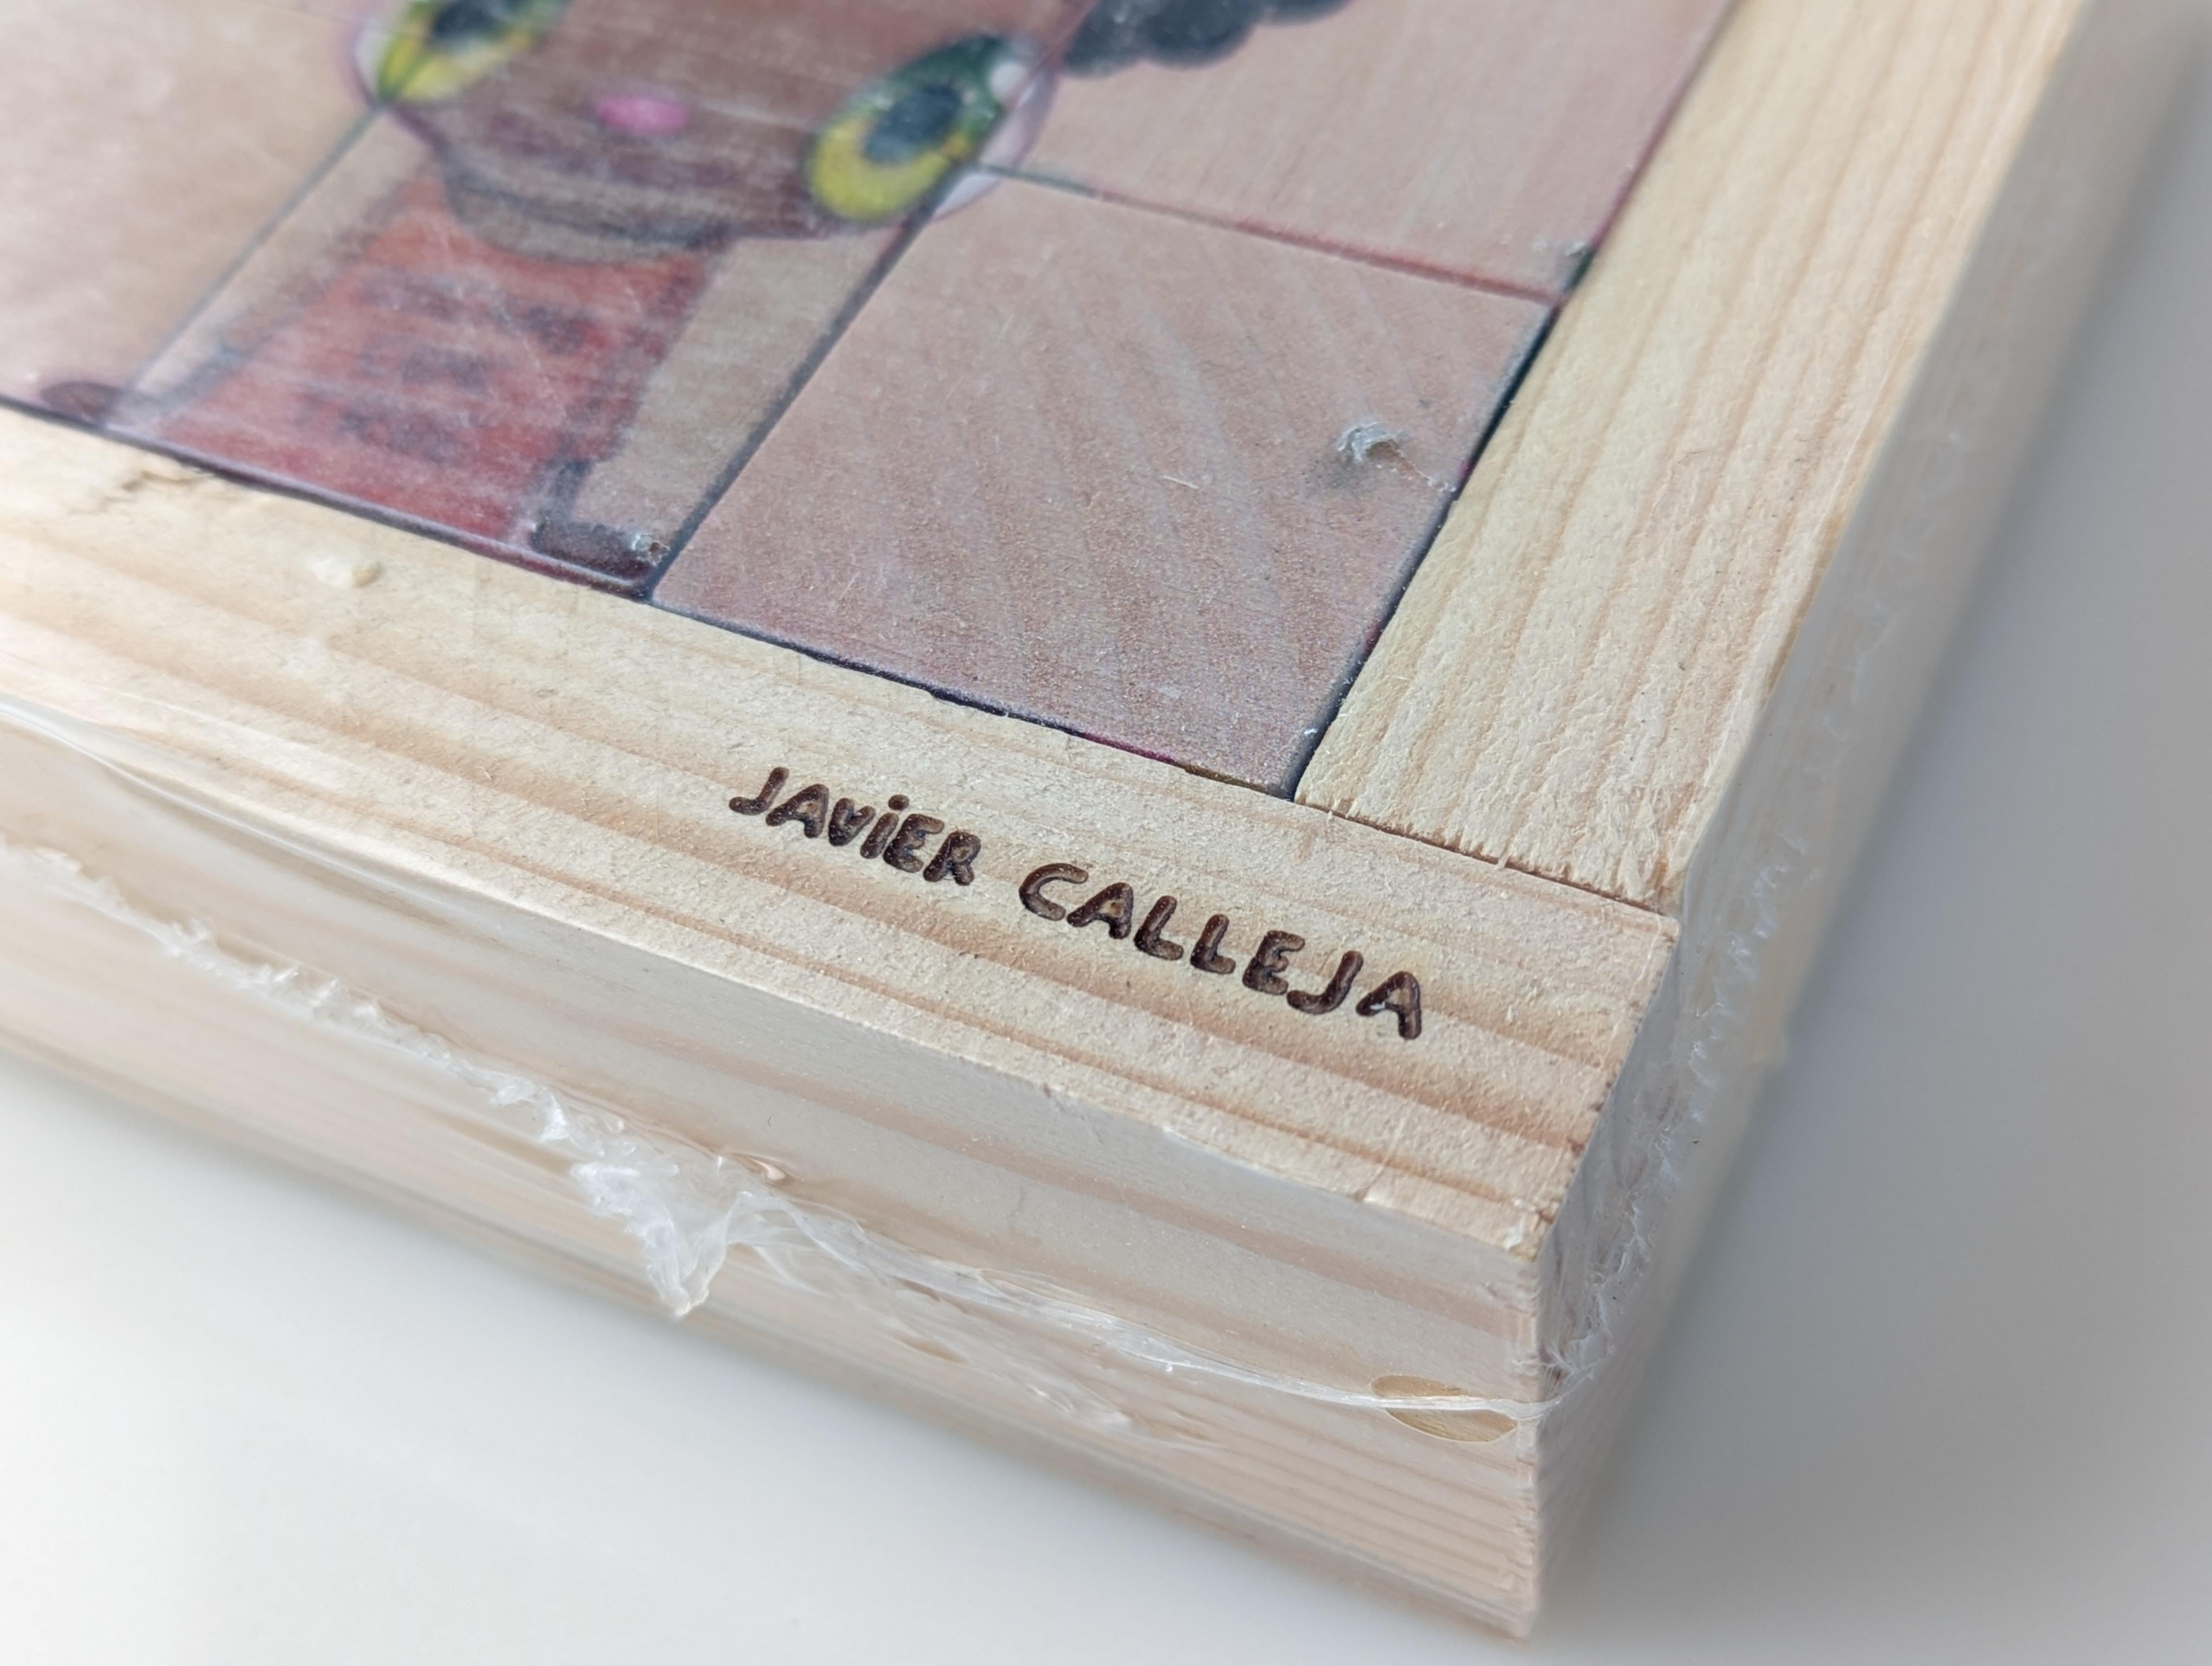 Wooden Puzzle by Javier Calleja Limited Edition 1